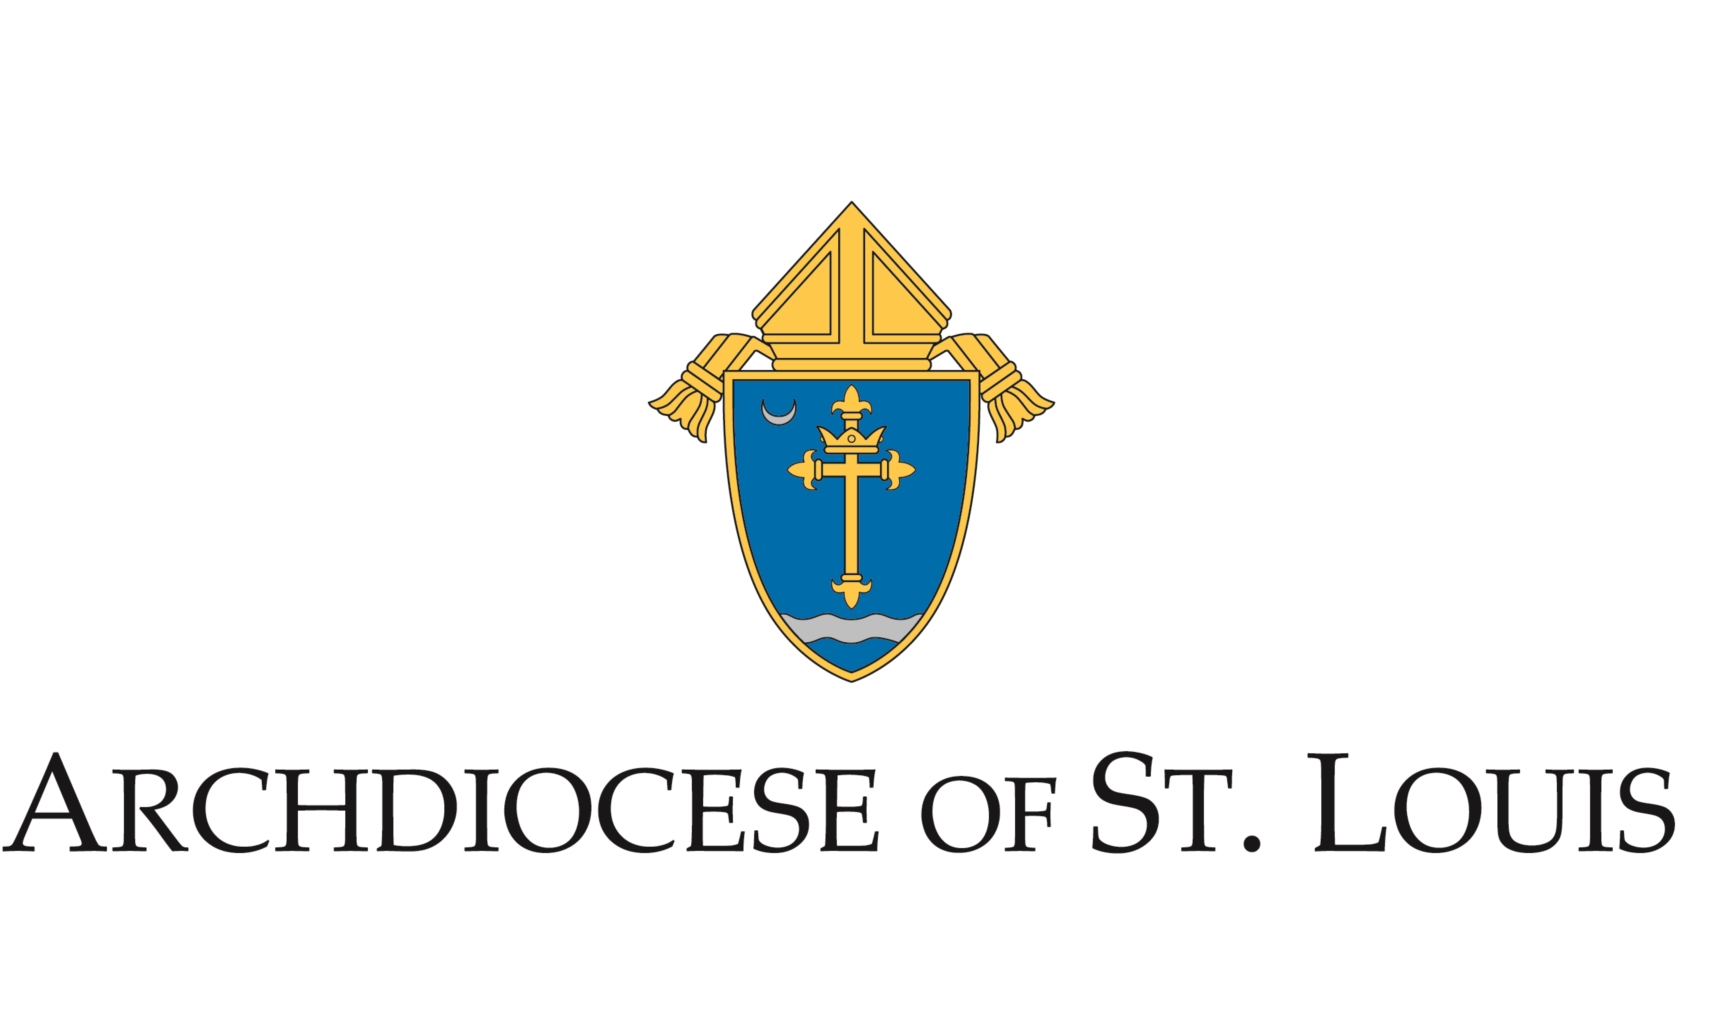 Archdiocese of St. Louis logo